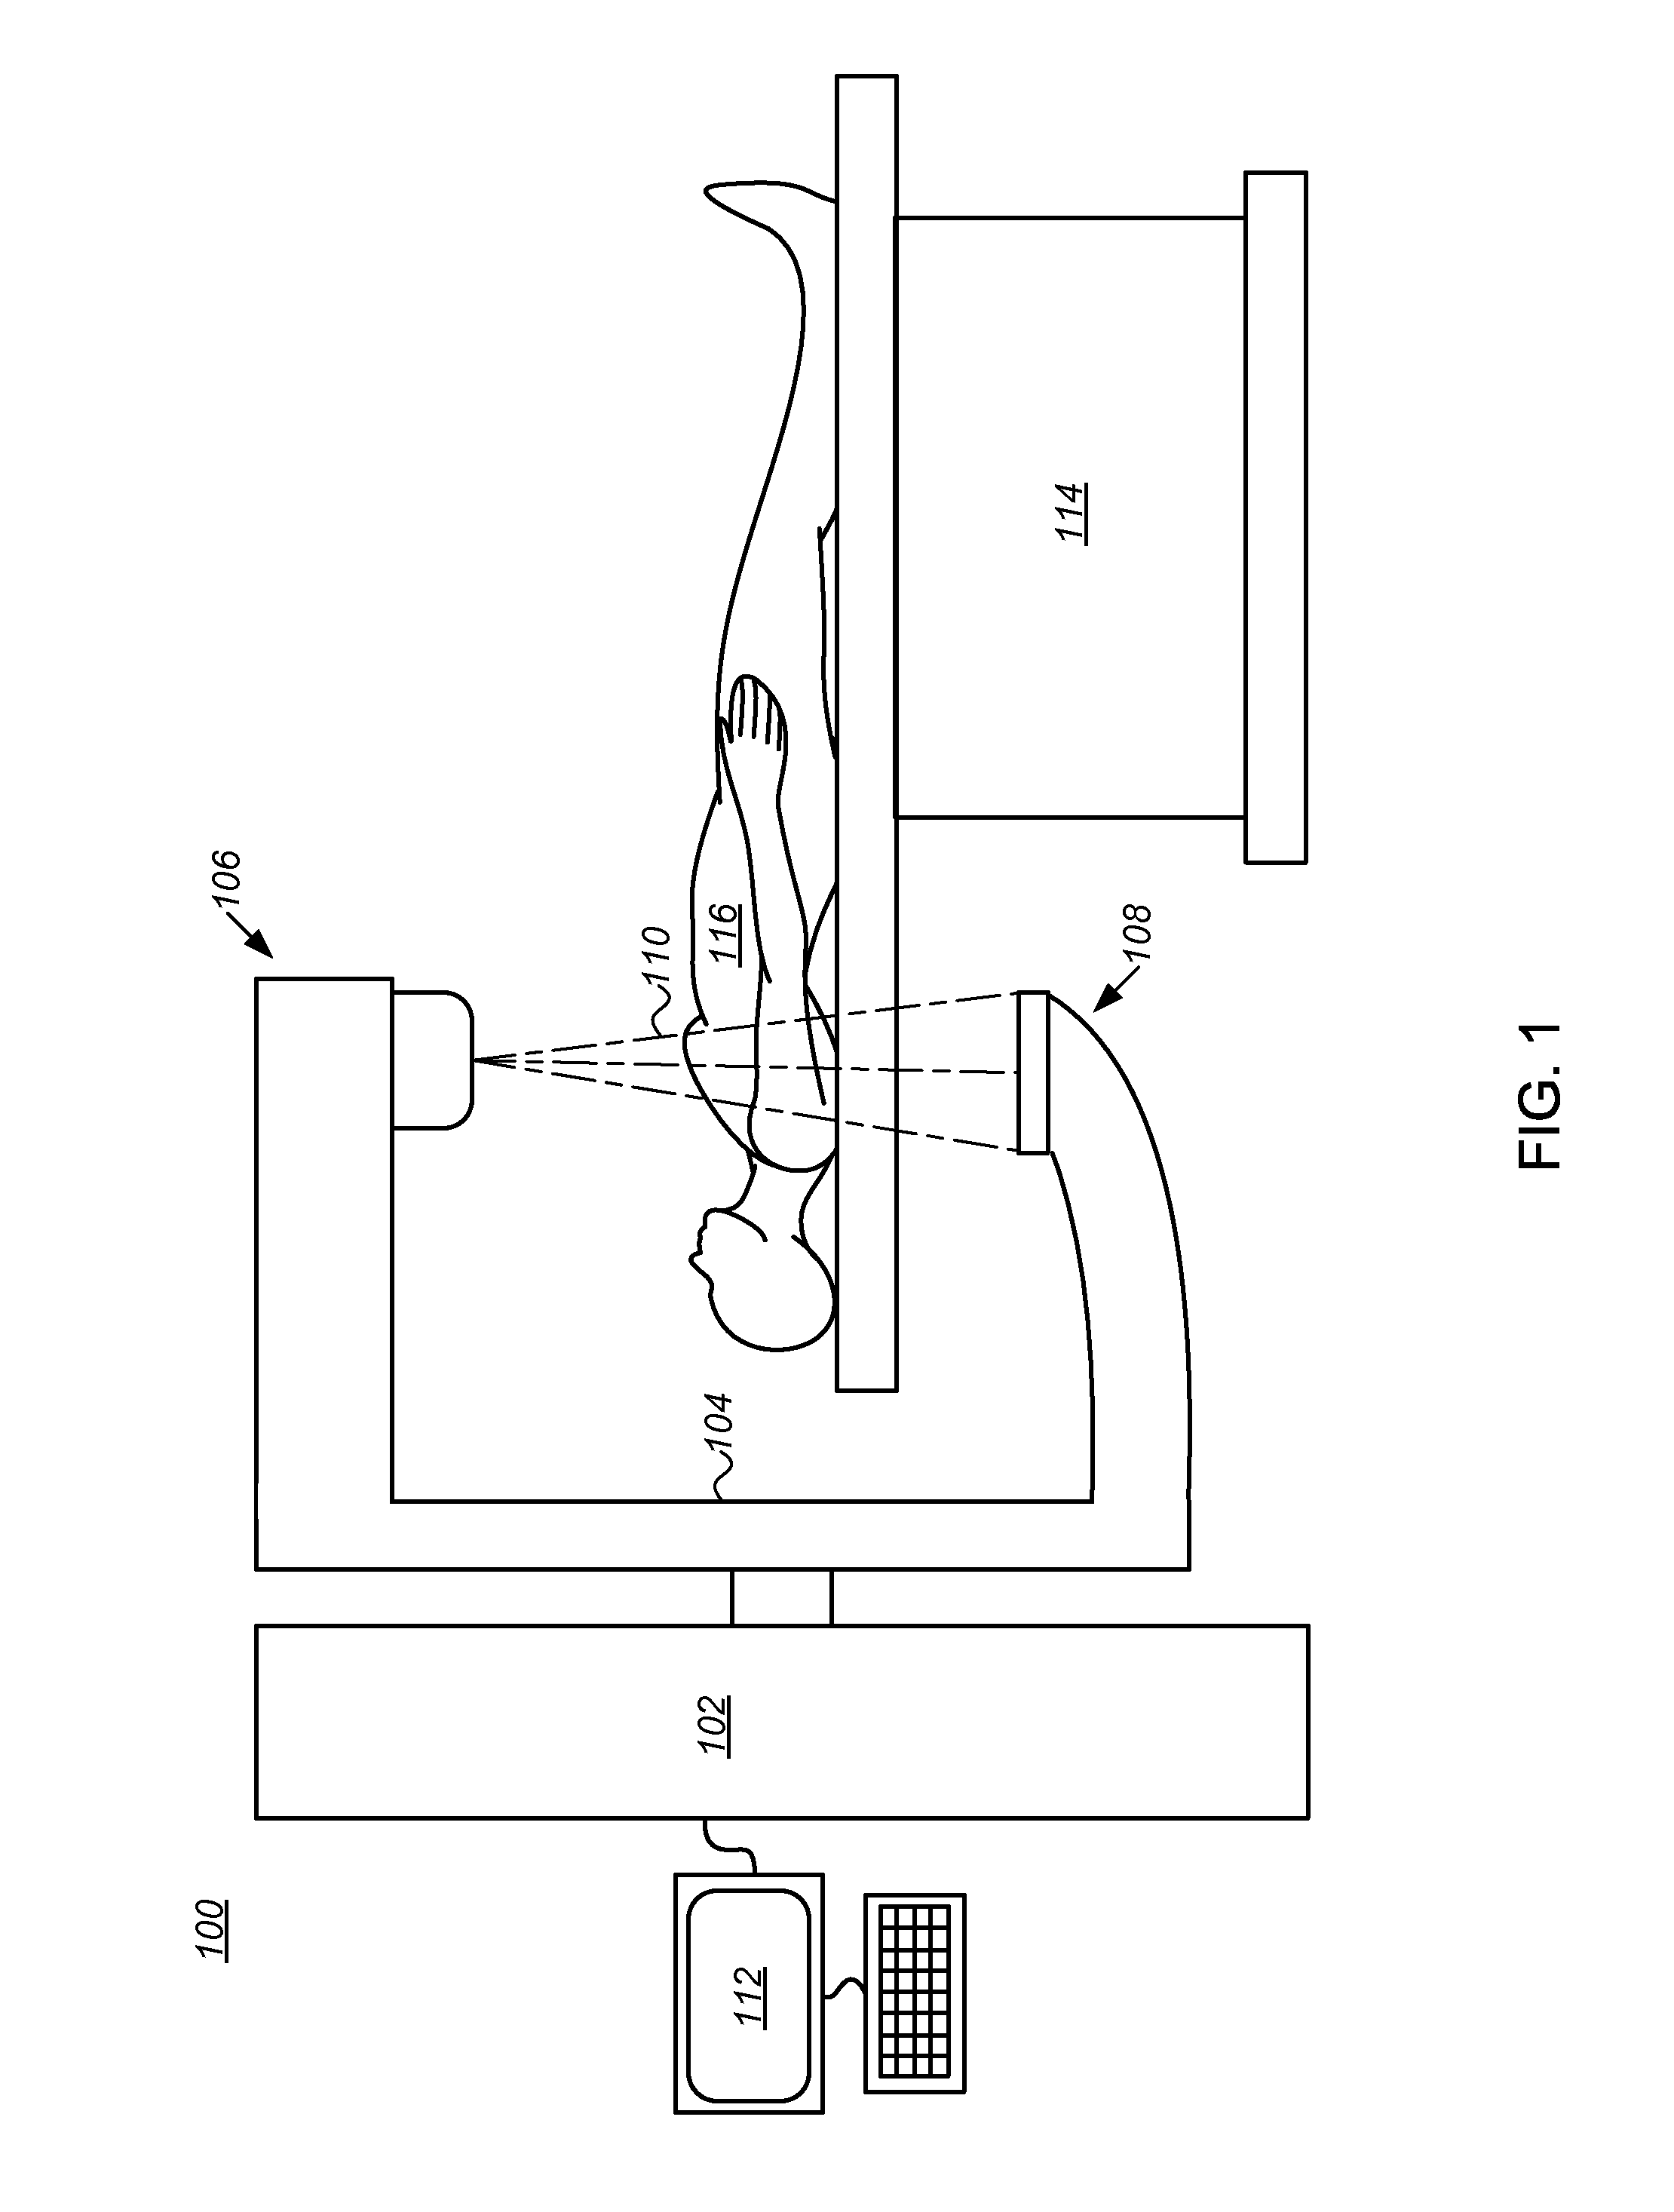 System and method for projection image tracking of tumors during radiotherapy